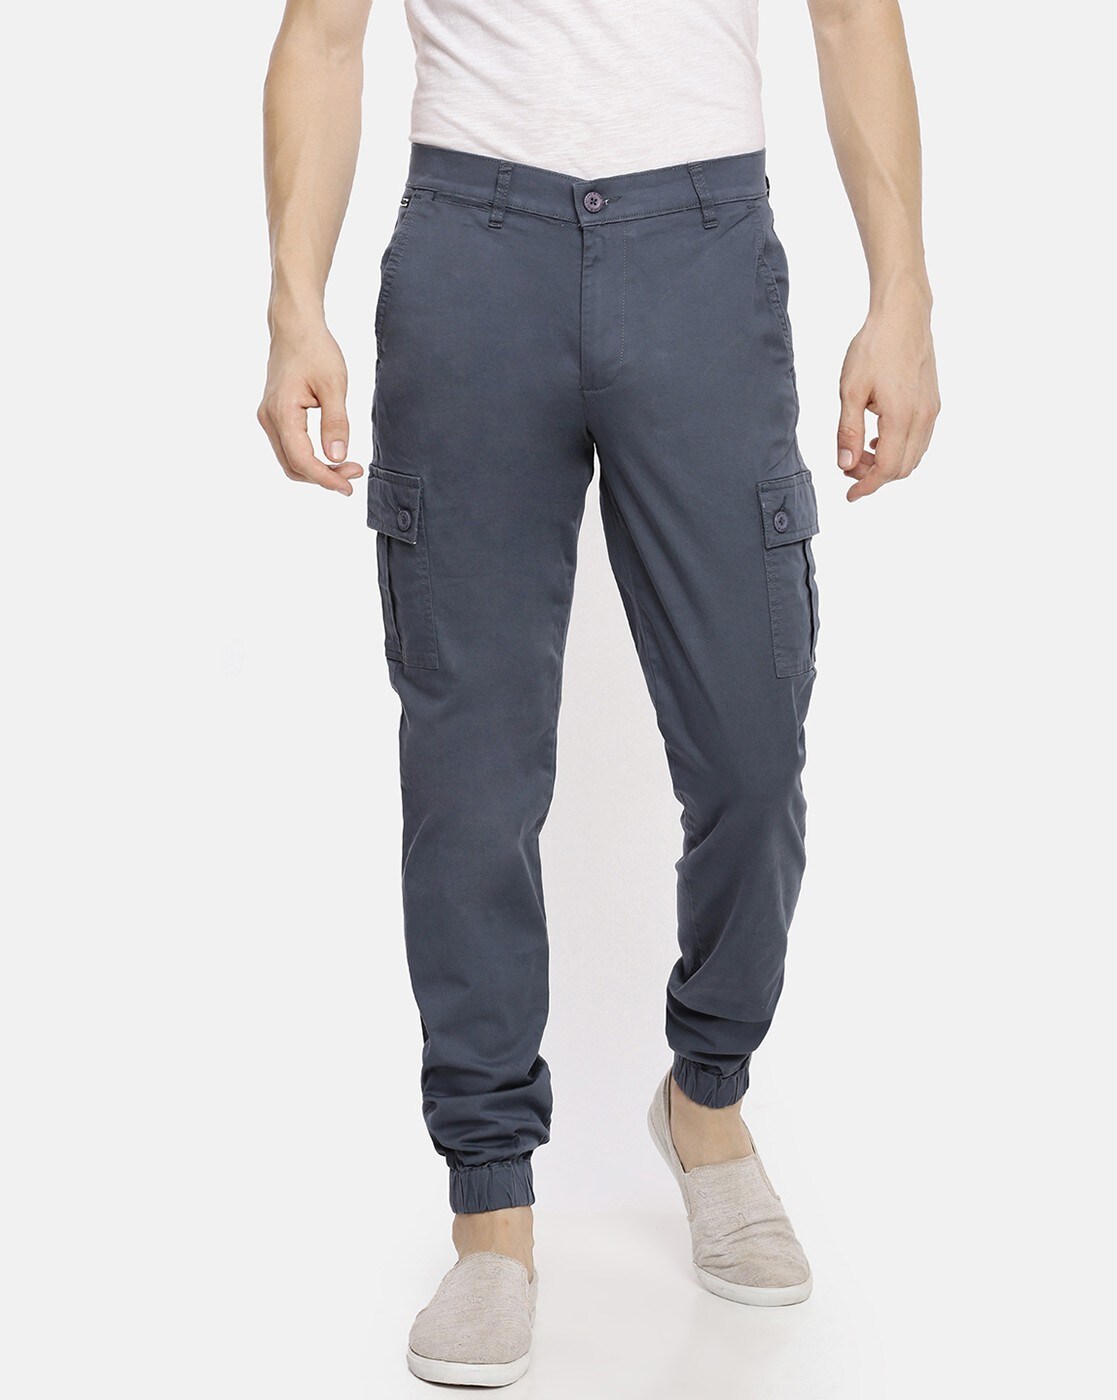 Buy Navy Blue Four Pocket Cargo Pants Pure Cotton for Best Price, Reviews,  Free Shipping